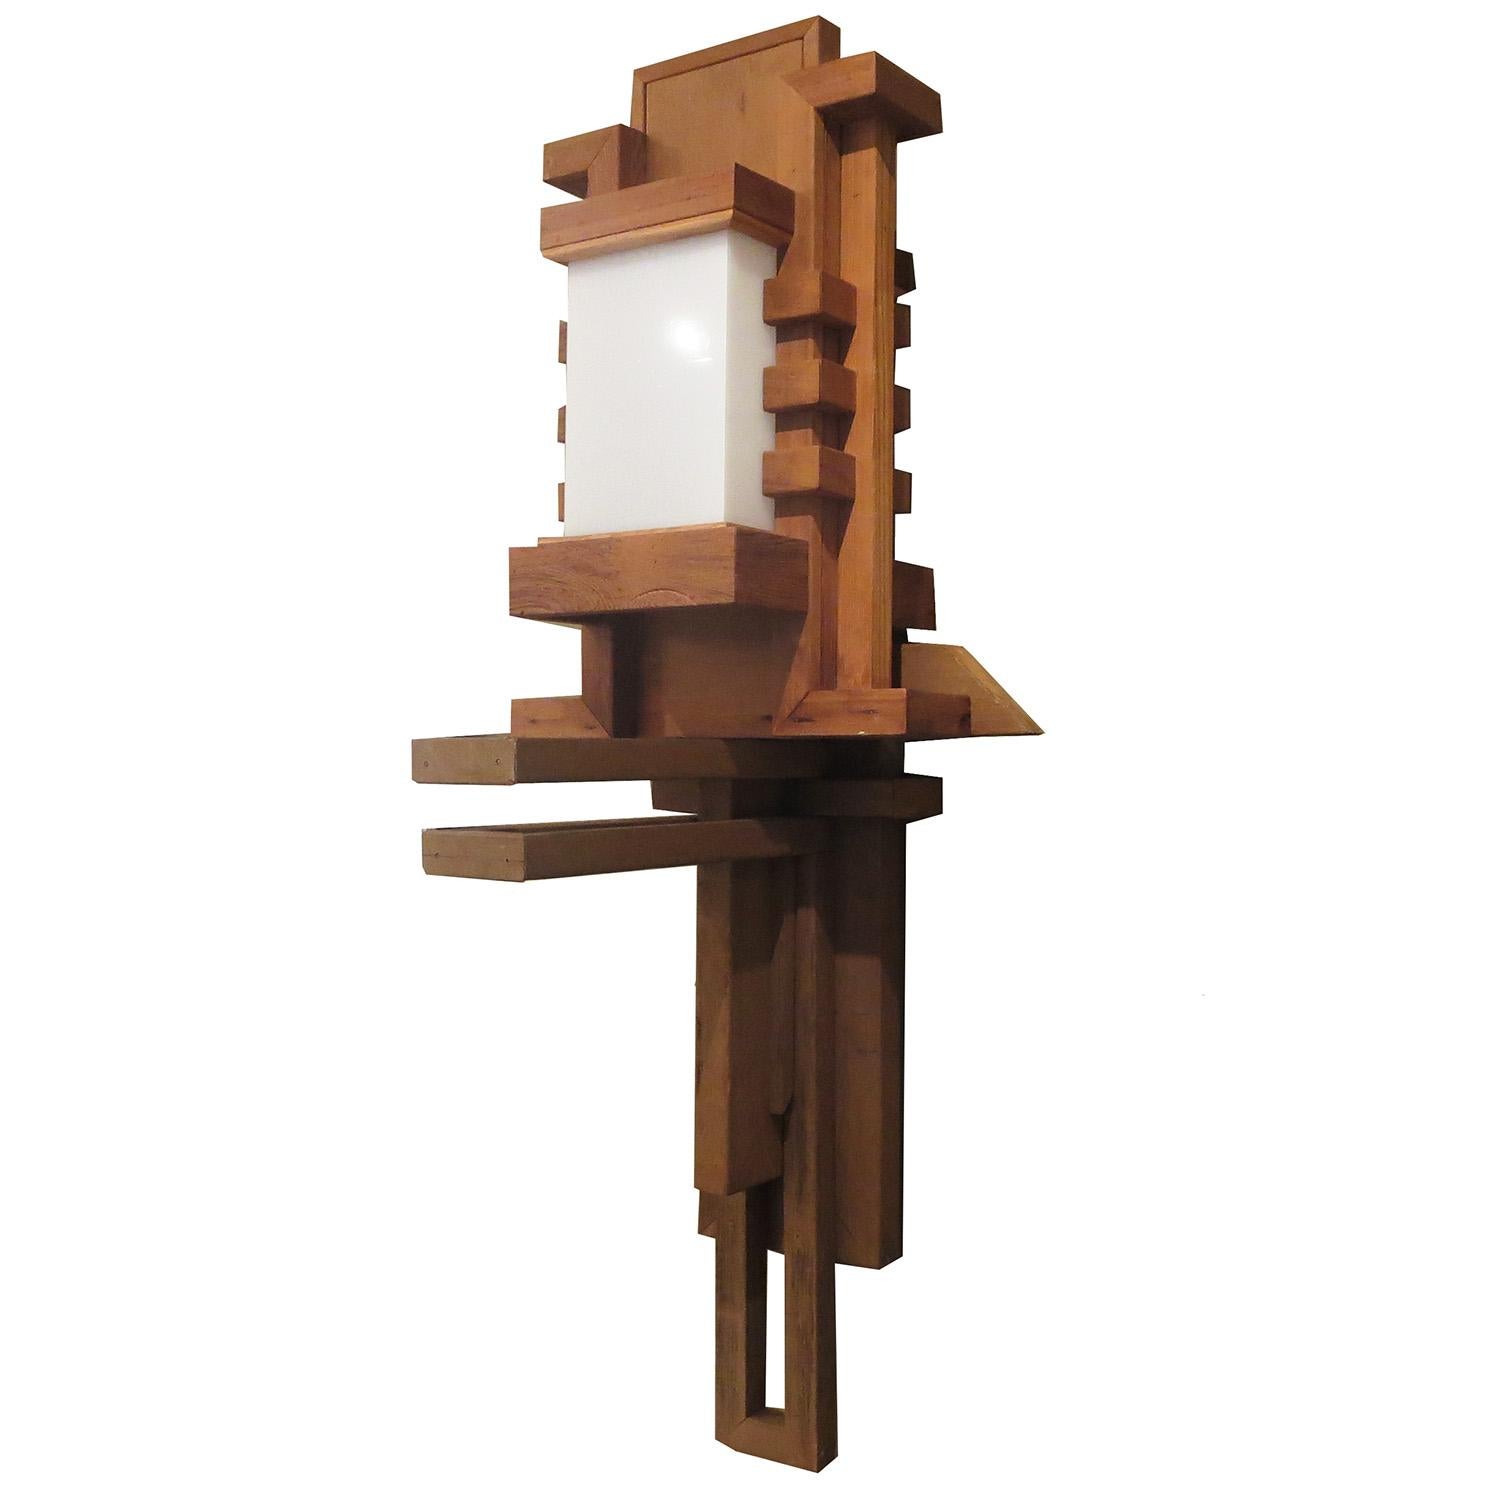 This incredible Frank Lloyd Wright inspired wall lamp was created for a 1950s La Crescenta, California modern home. The lamp and entire home, were an obvious homage to Americas premier architect / designer Frank Lloyd Wright. The fixture is